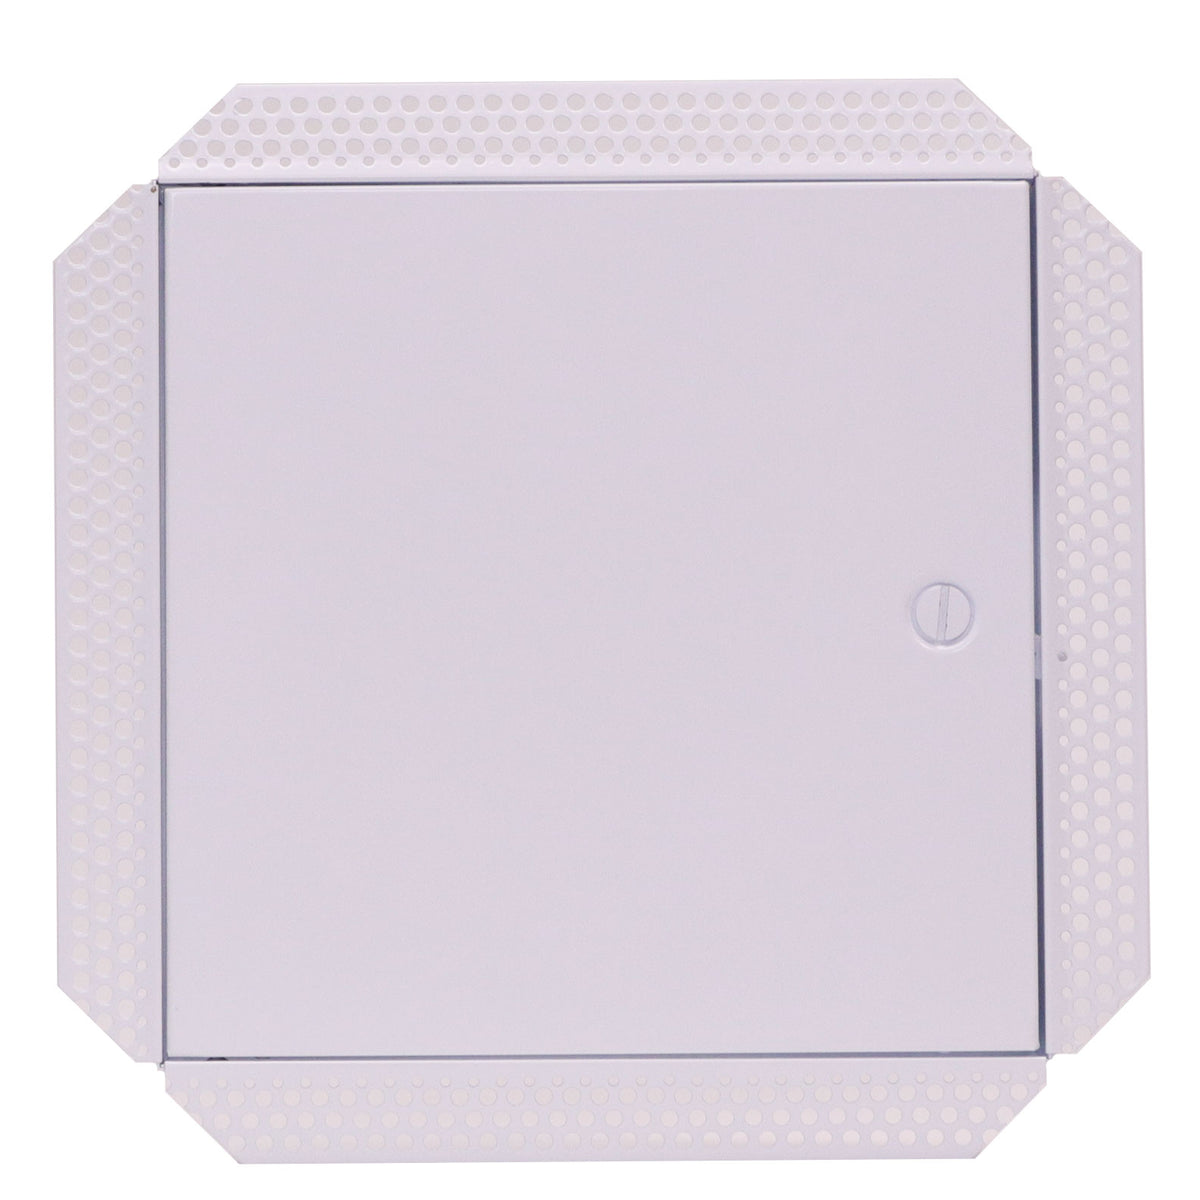 8&quot; X 8&quot; Steel Access Panel Door For Wall / Ceiling Application With Slotted Lock - [Outer Dimensions: 9&quot; Width X 9&quot; Height]